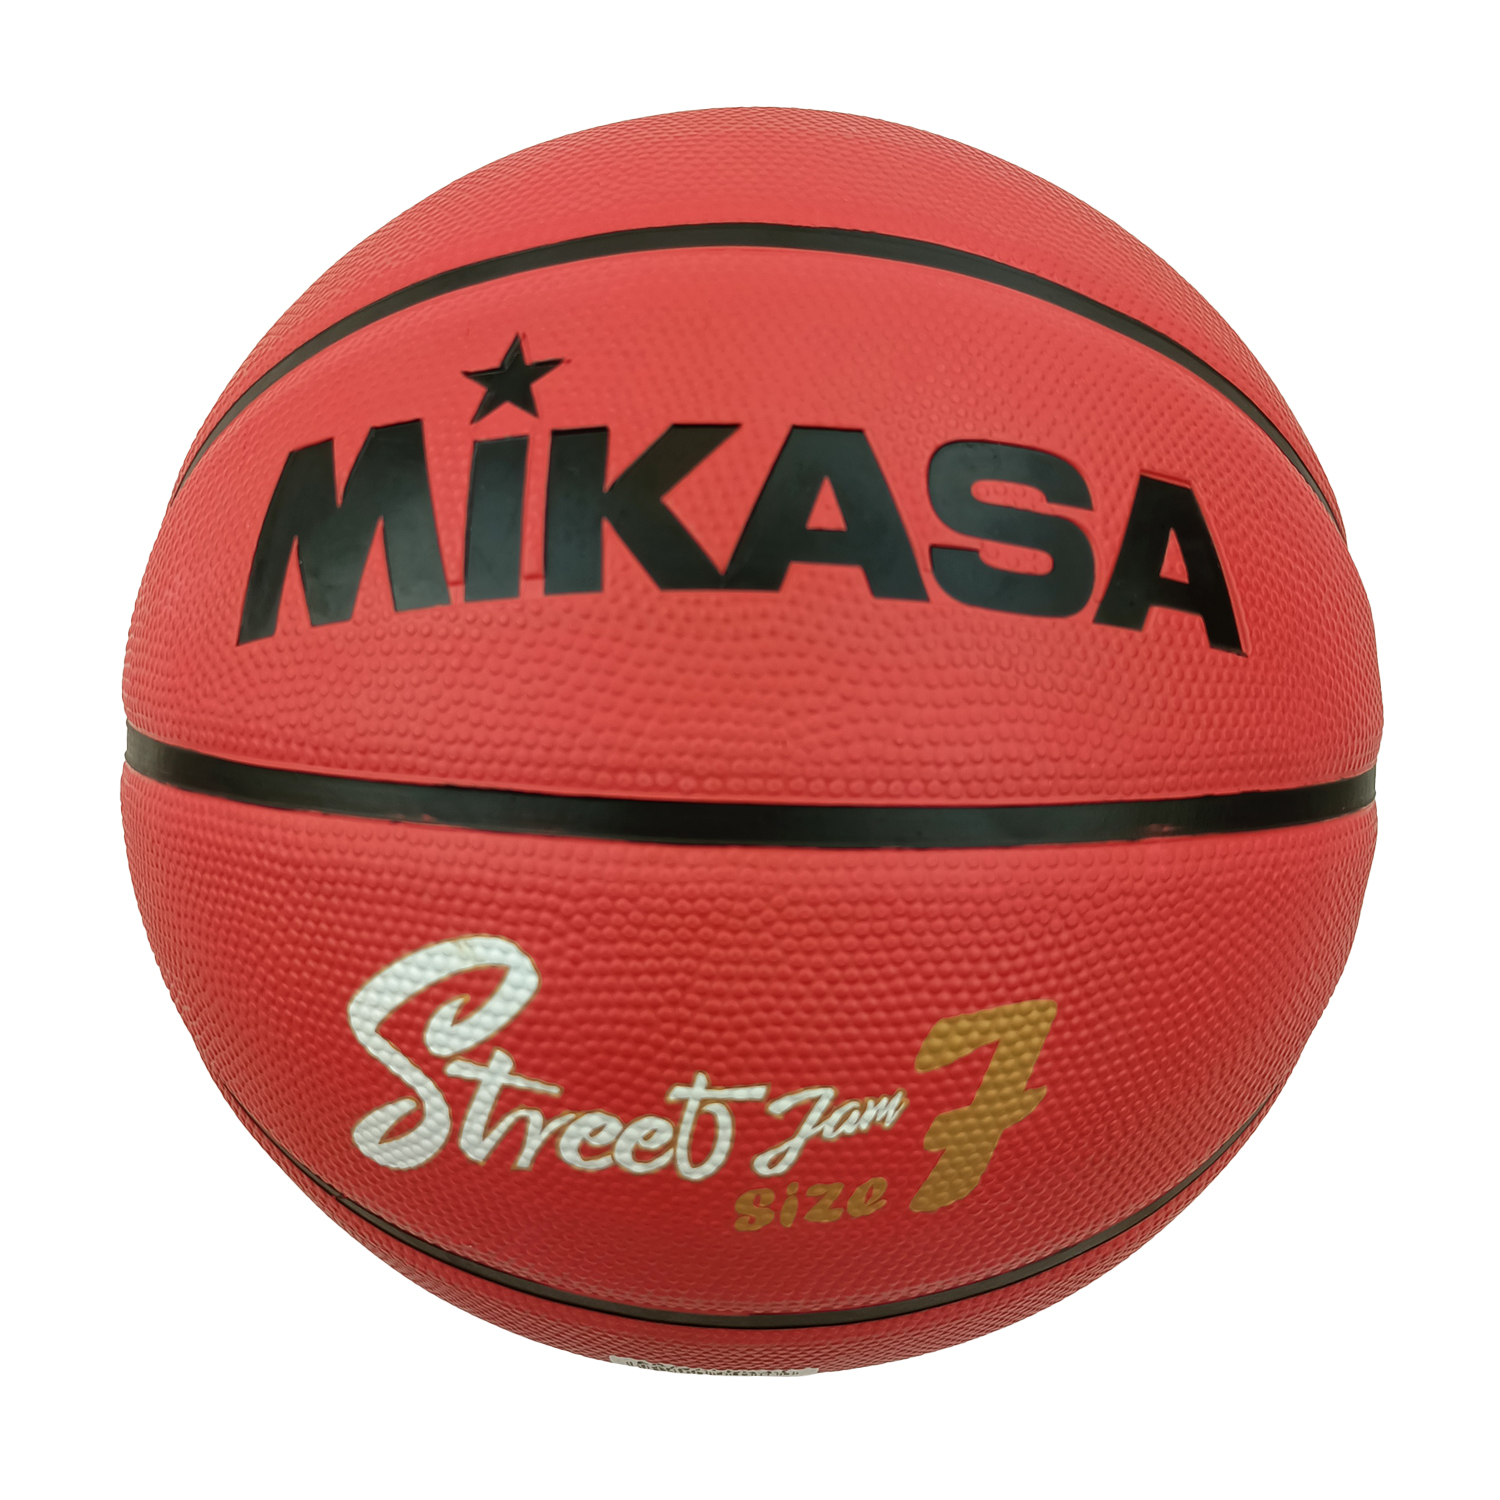 MIKASA BB734C-RBBK BASKETBALL SIZE 7 WITH QUALITY RUBBER (RED/BROWN)